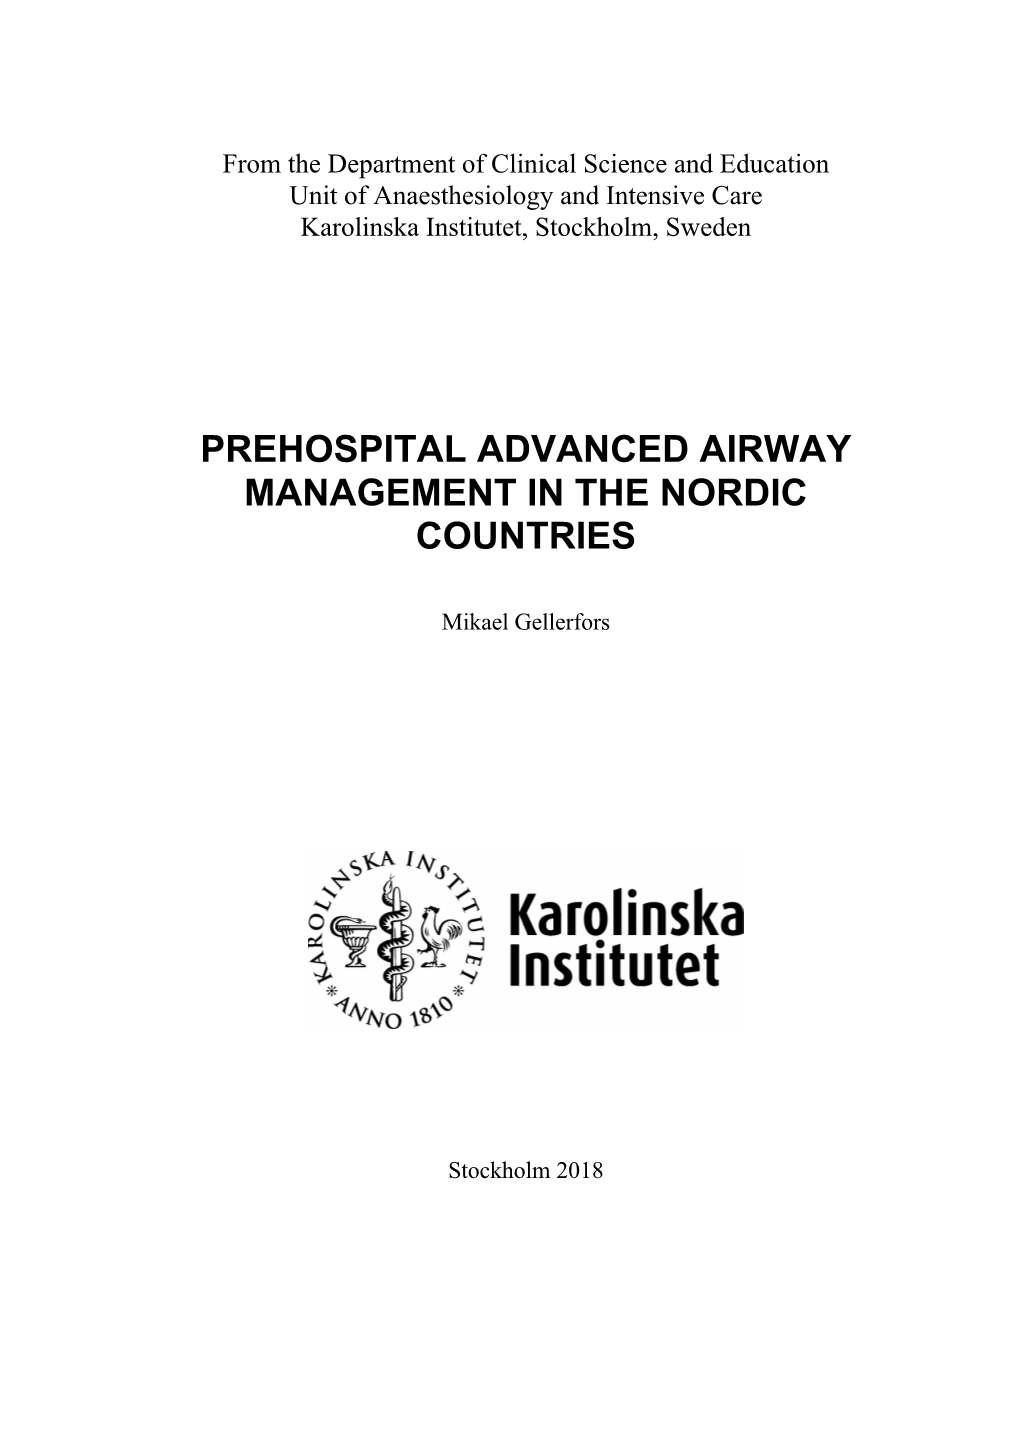 Prehospital Advanced Airway Management in the Nordic Countries